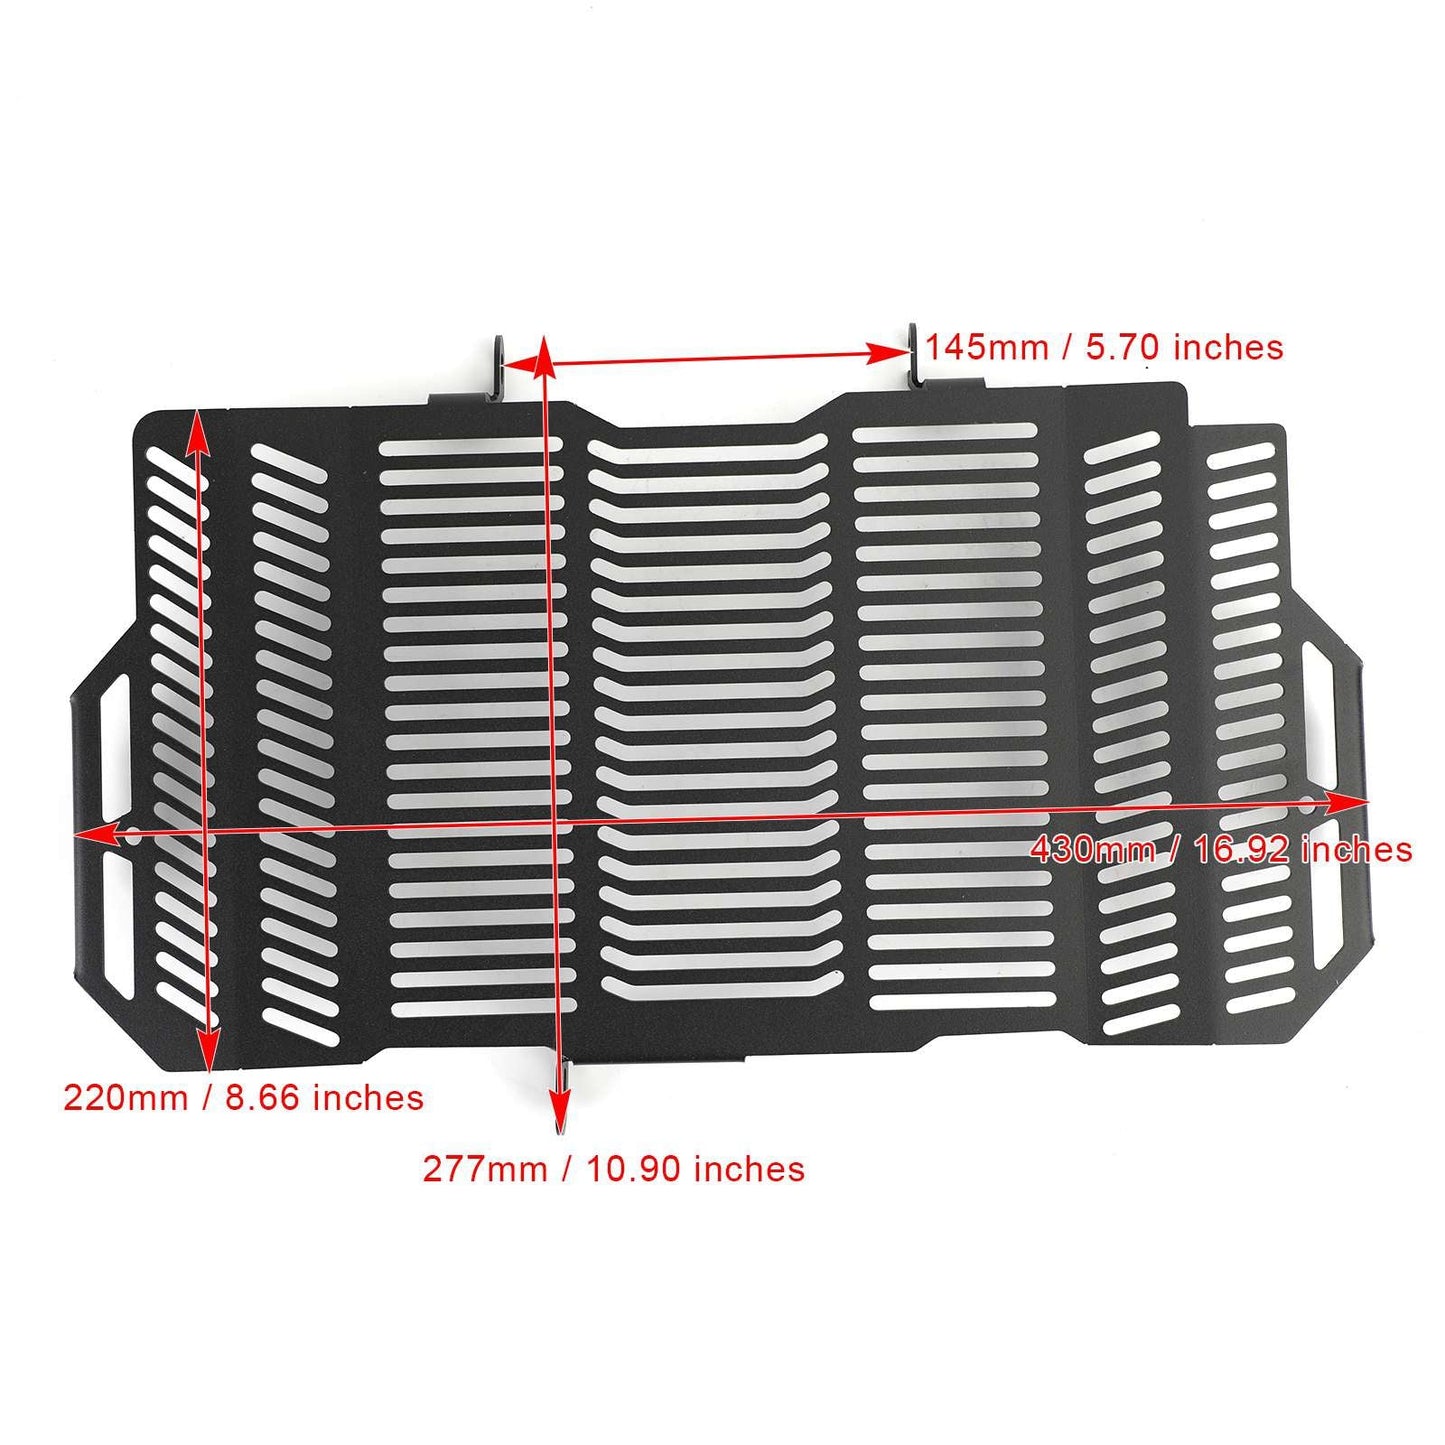 Stainless Steel Radiator Guard Protector Grill Cover Fit For Honda CB650R Neo Sports Cafe CBR650R 2019-2020 2021 BLK